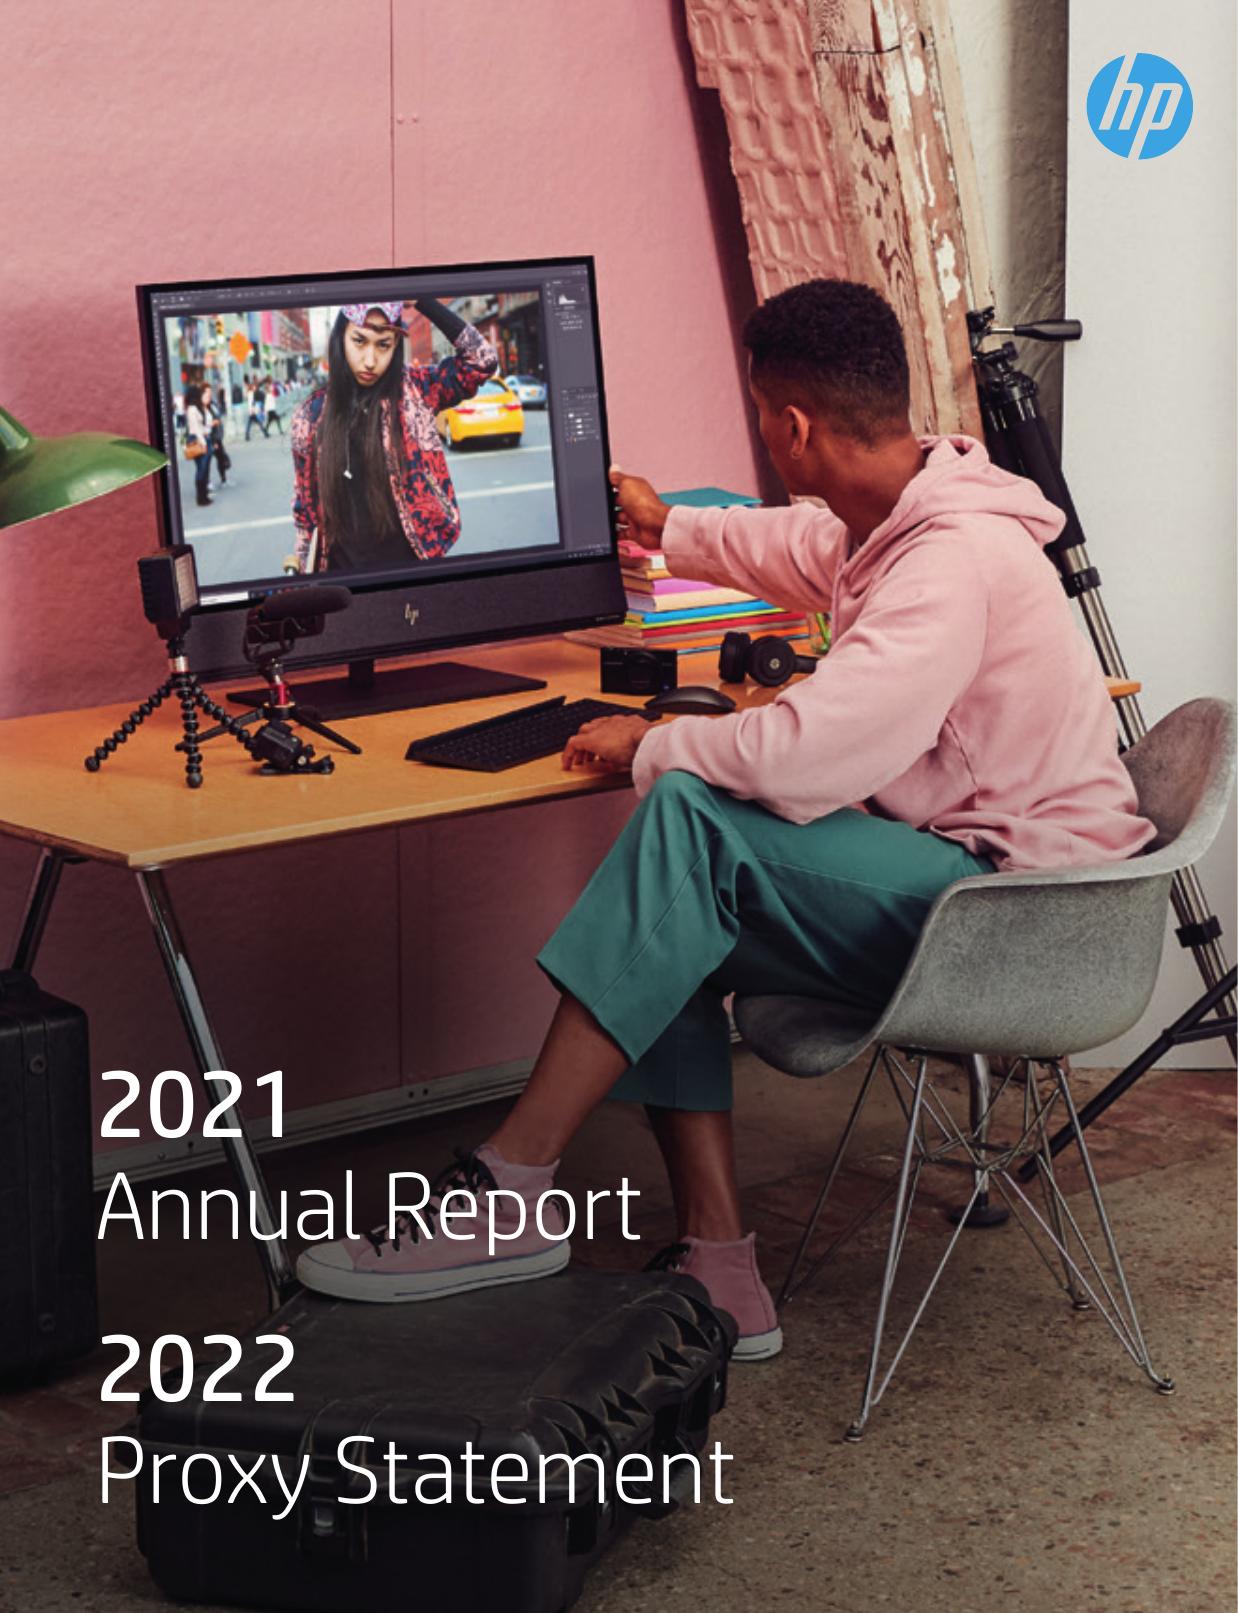 HPANNUALMEETING 2022 Annual Report